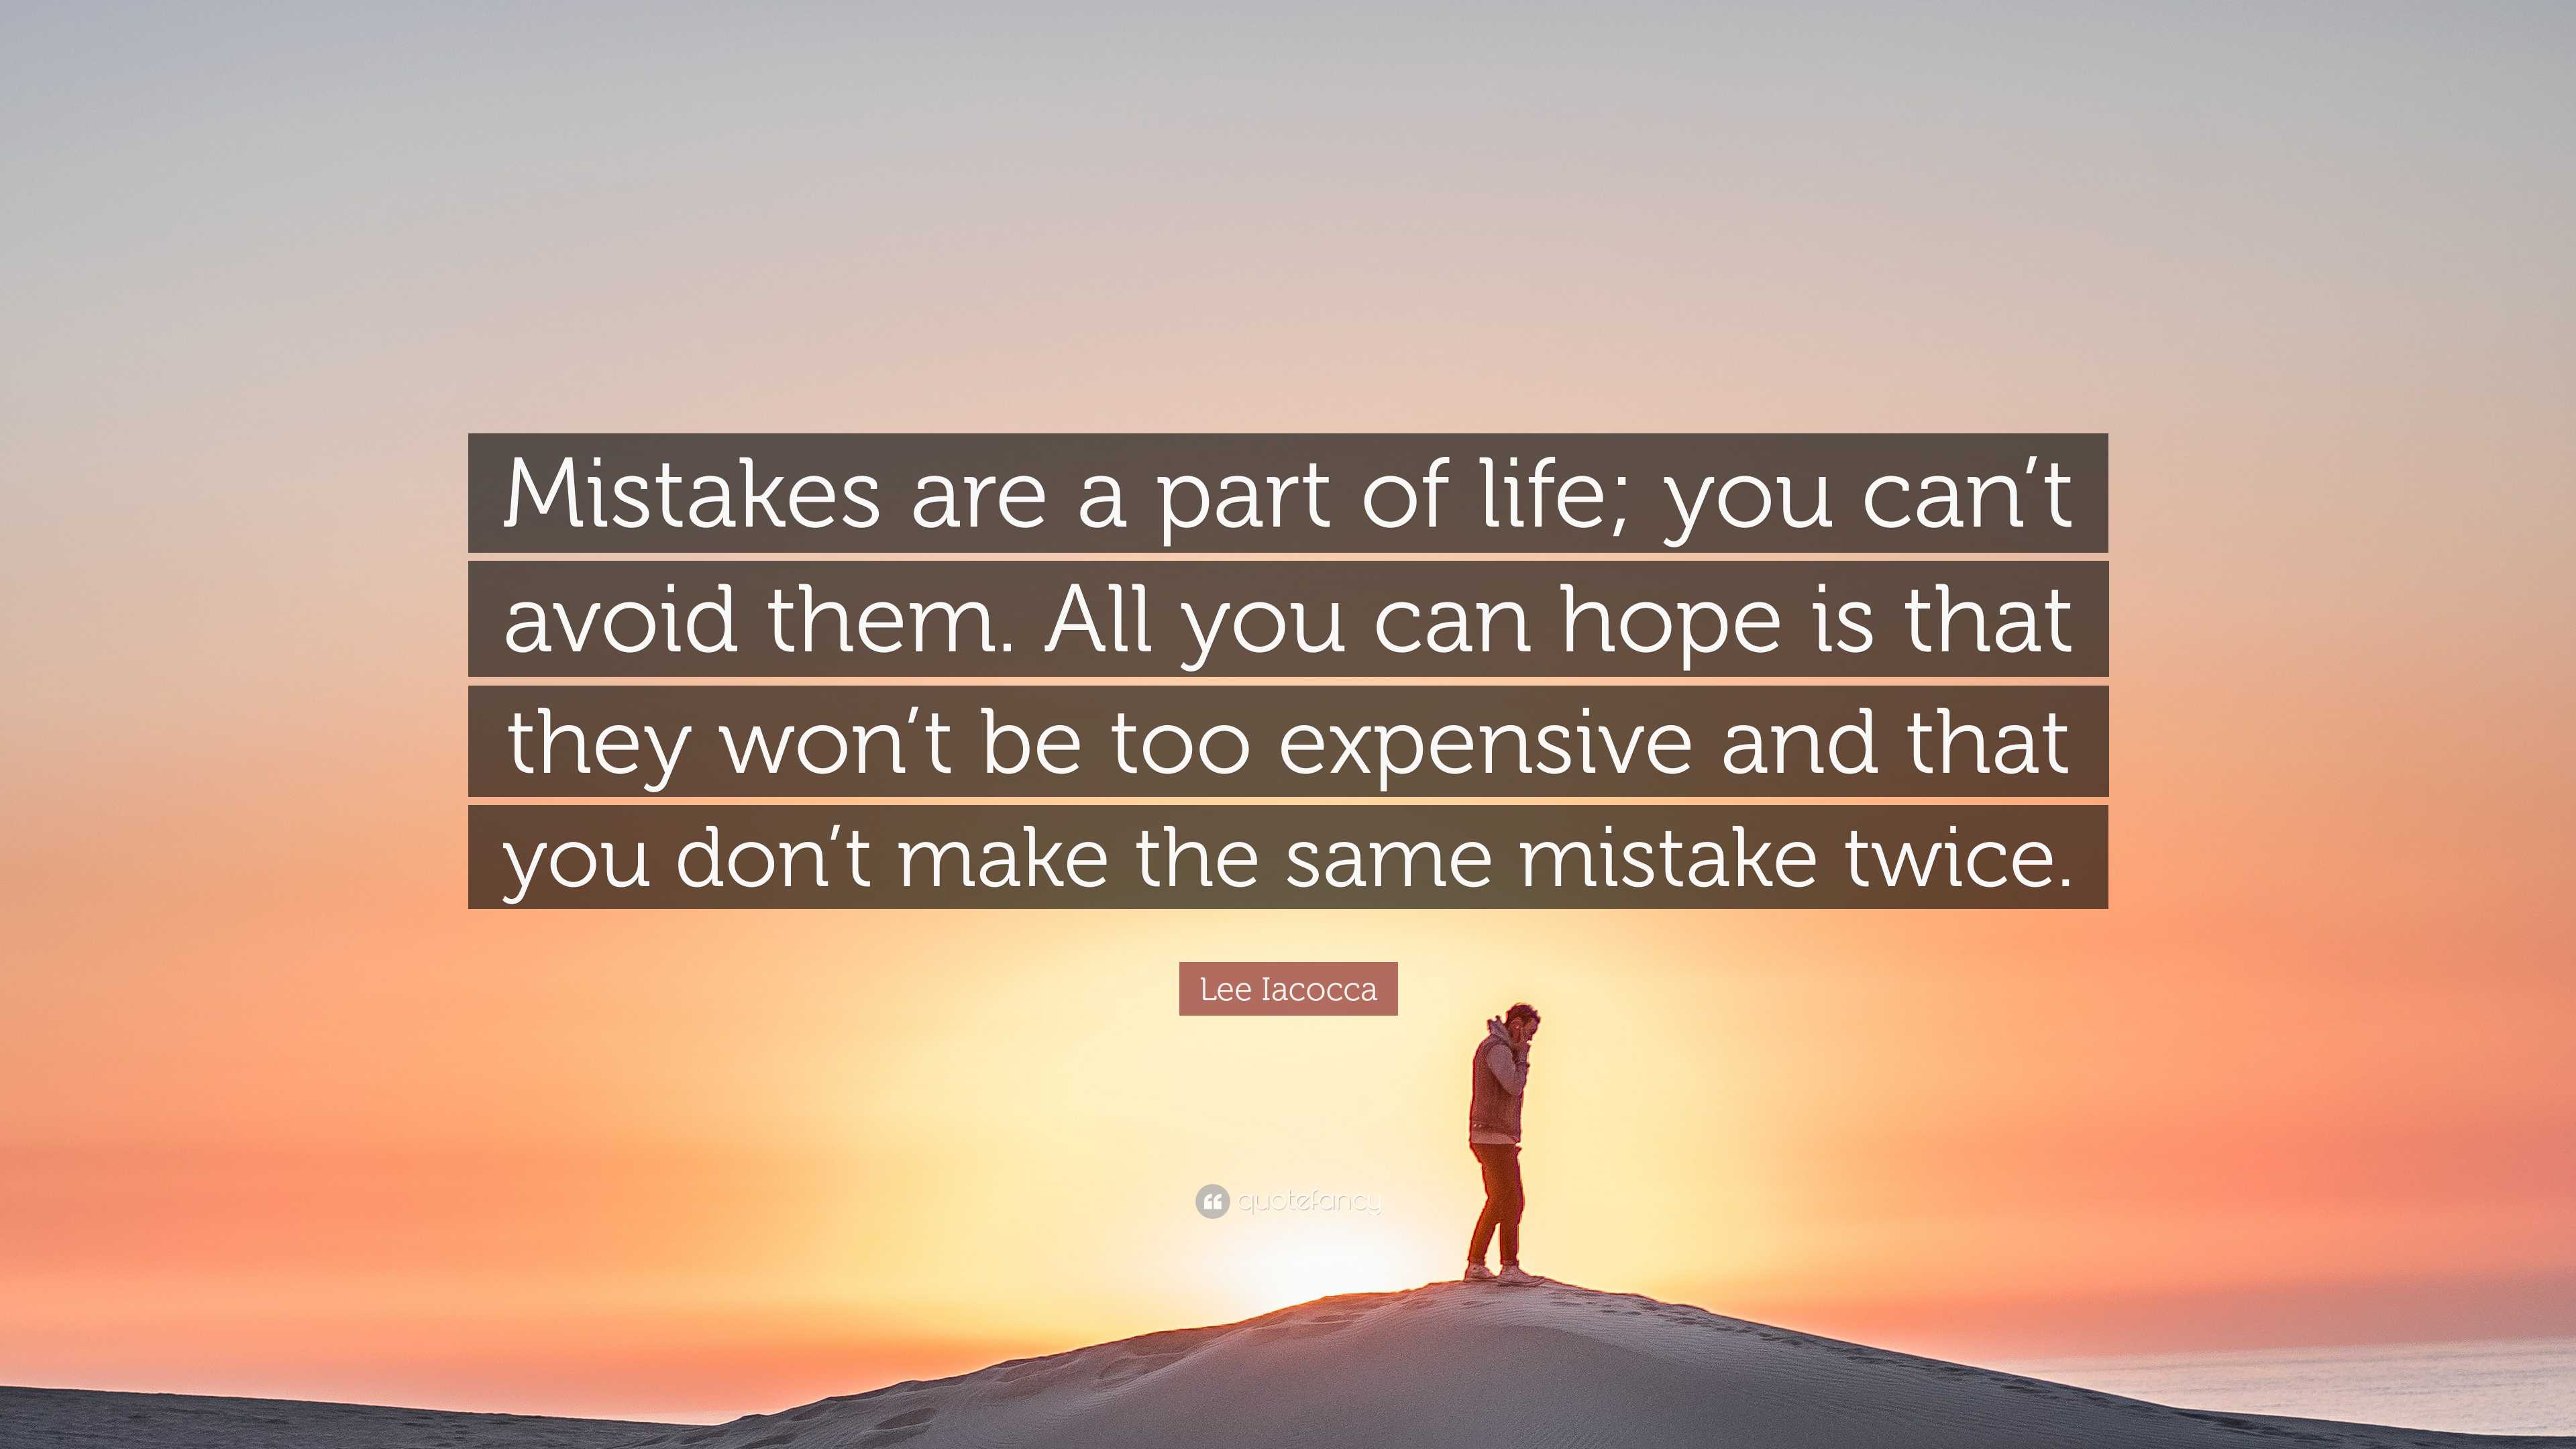 Your mistakes, like mine, are a part of who you are now. You can't